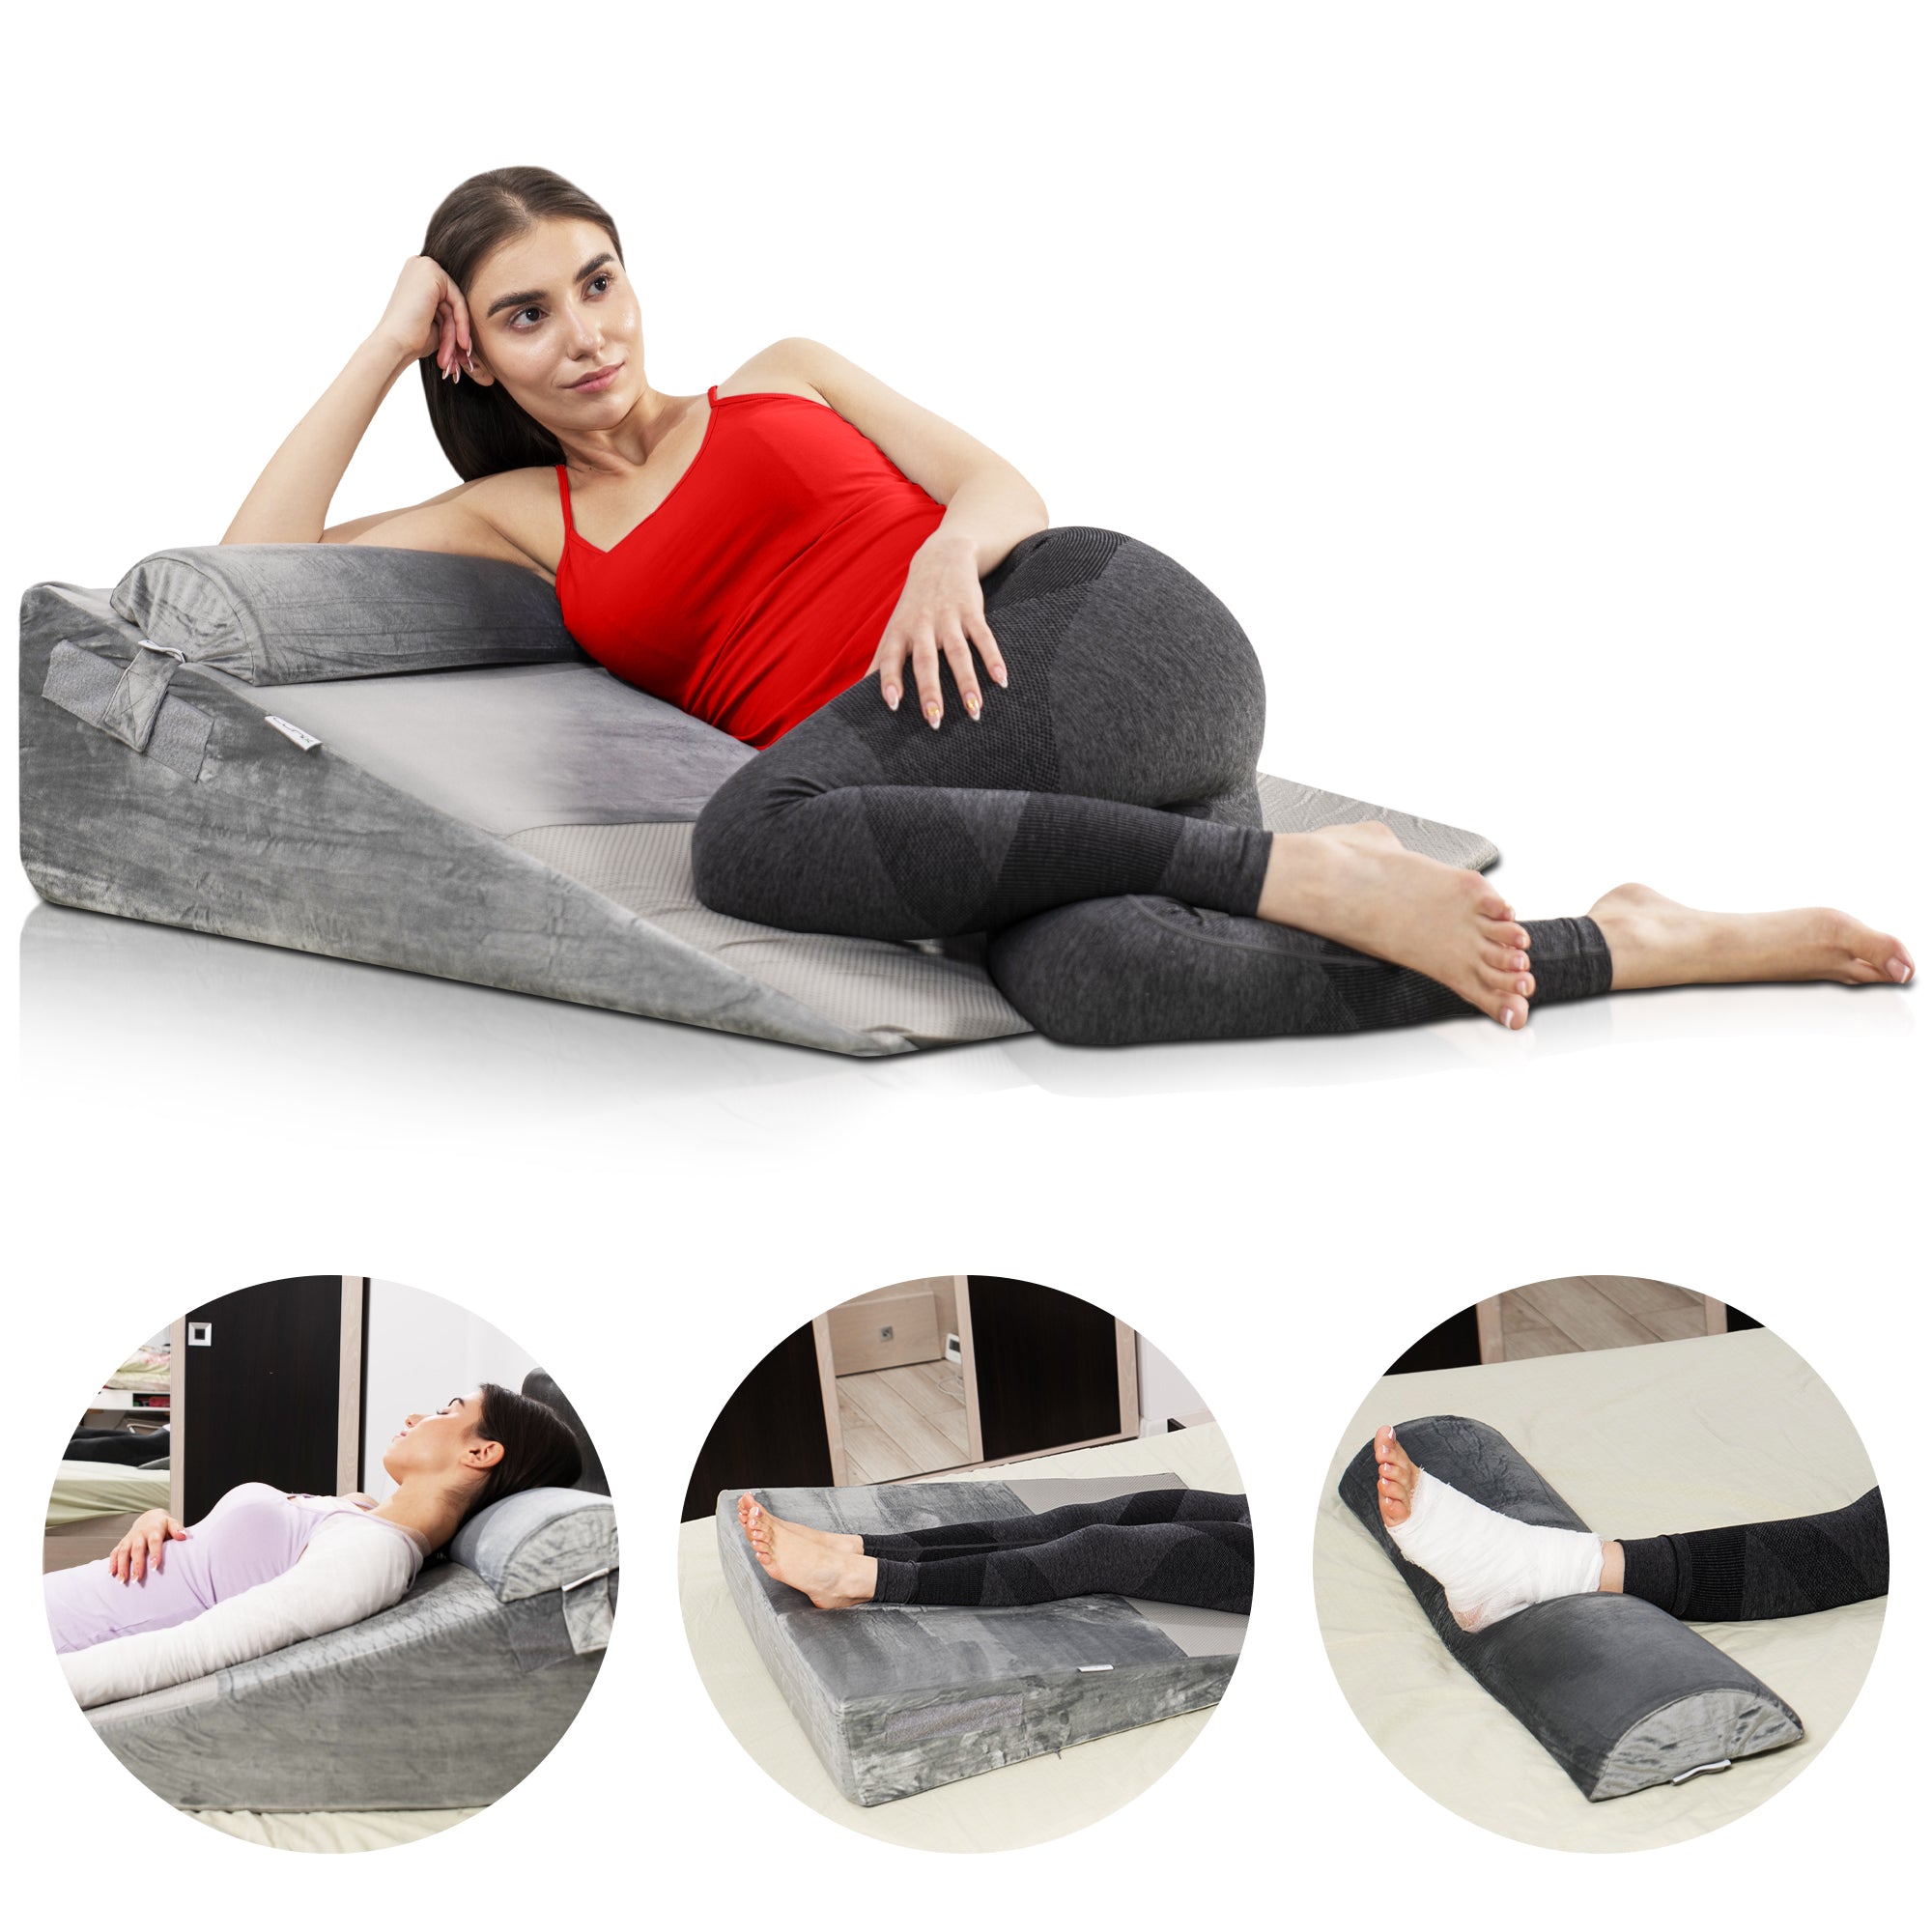 LX5 4pcs Orthopedic Bed Wedge Pillow System, with Hot Cold Pack Brown -  Lunixinc